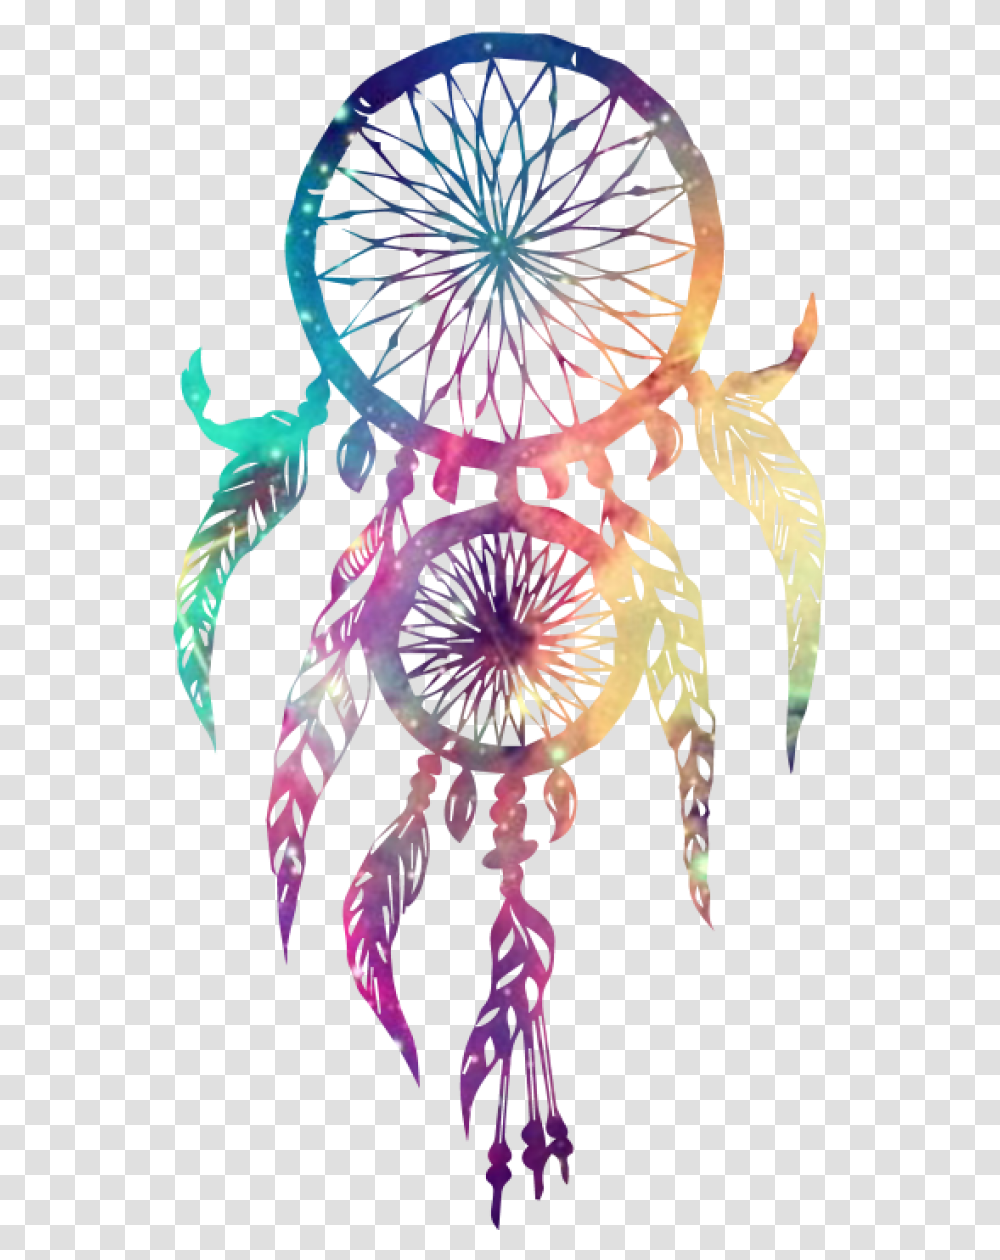 United Dreamcatcher Of In Indigenous States Americans Background Dreamcatcher, Pattern, Ornament Transparent Png